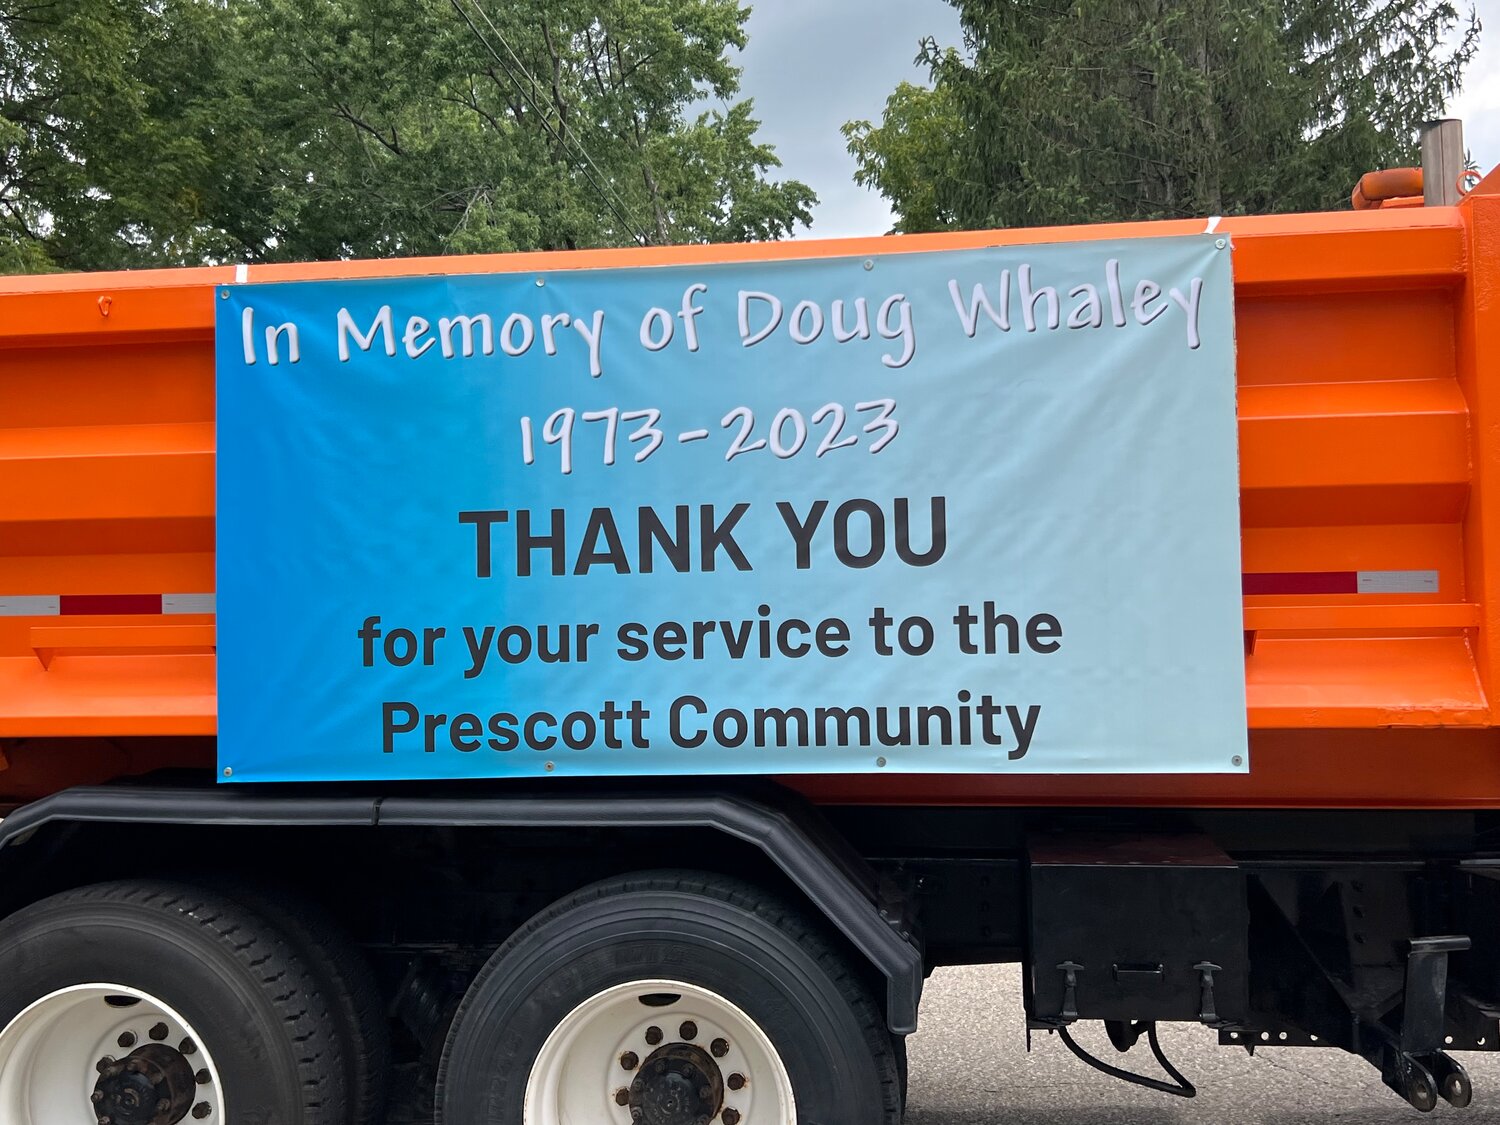 A City of Prescott Public Works Department truck in the parade featured a sign stating, “In Memory of Doug Whaley.” Whaley, who worked for the public works department, was on his way into Prescott earlier this year to salt icy roads when he stopped and helped a motorist on Highway 35 whose vehicle went in the ditch. He was struck and killed by another motorist.